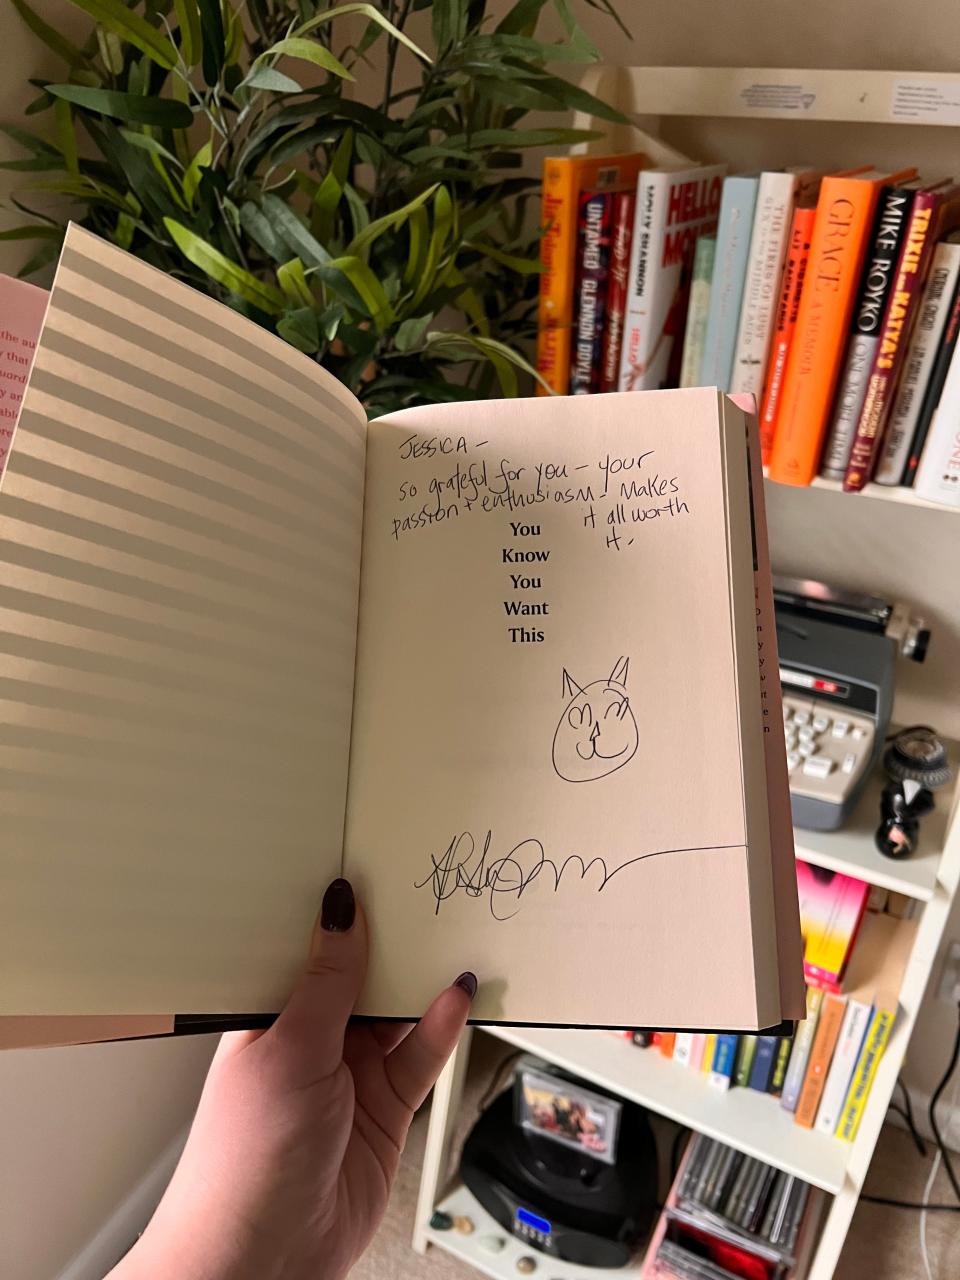 I left a few books in Chicago with some of my friends by accident, but "You Know You Want This," by Kristen Roupenian, was a book I made sure came to Iowa with me, and I am fortunate it did.